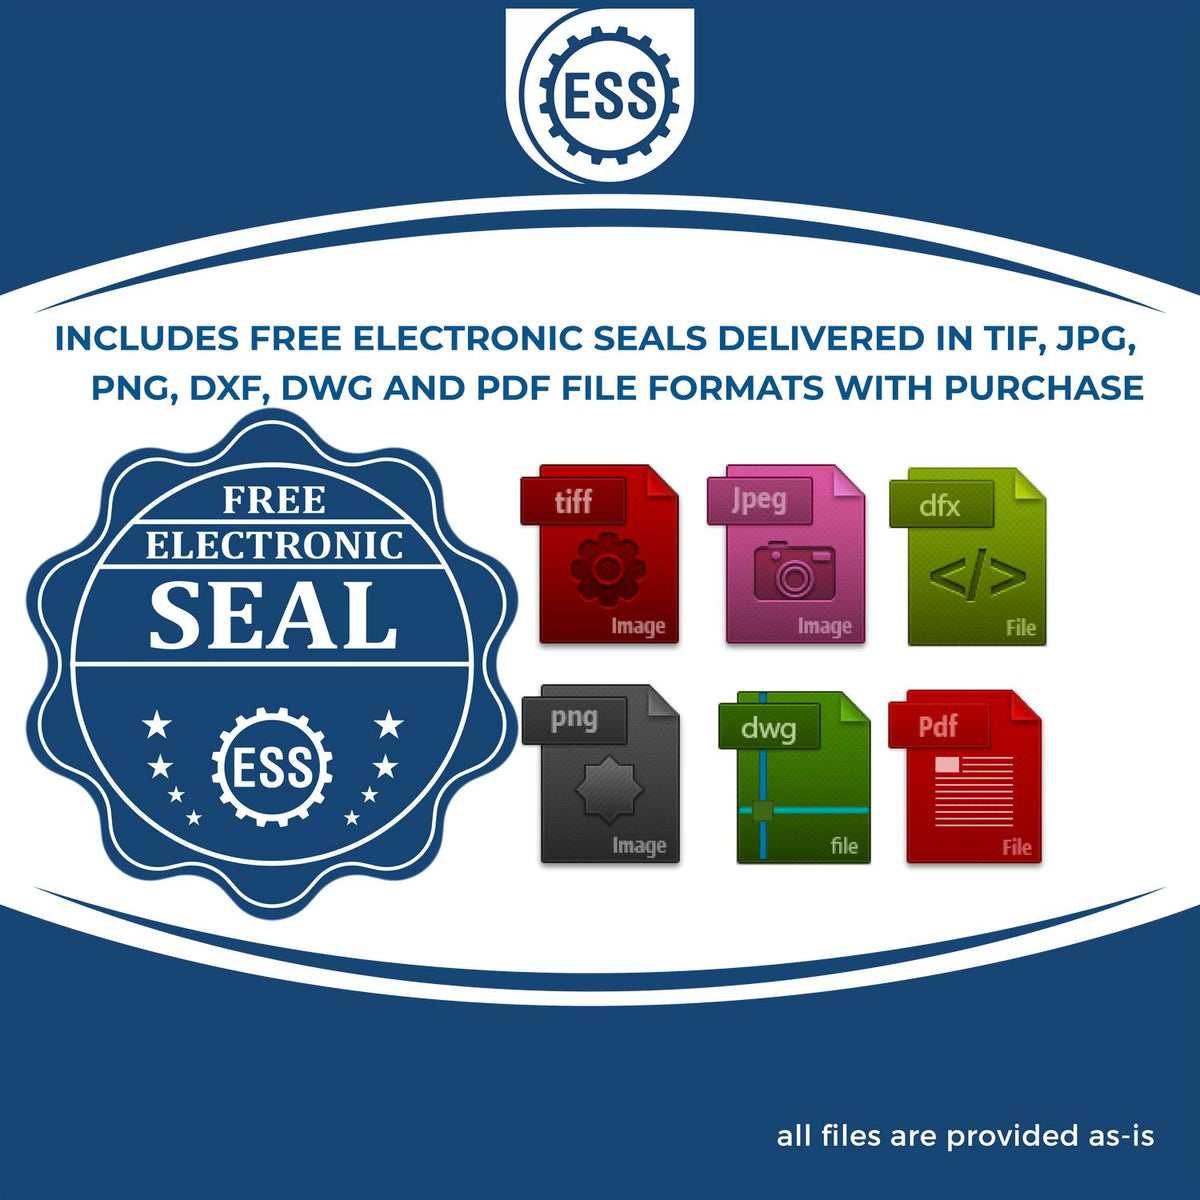 An infographic for the free electronic seal for the California Engineer Desk Seal illustrating the different file type icons such as DXF, DWG, TIF, JPG and PNG.